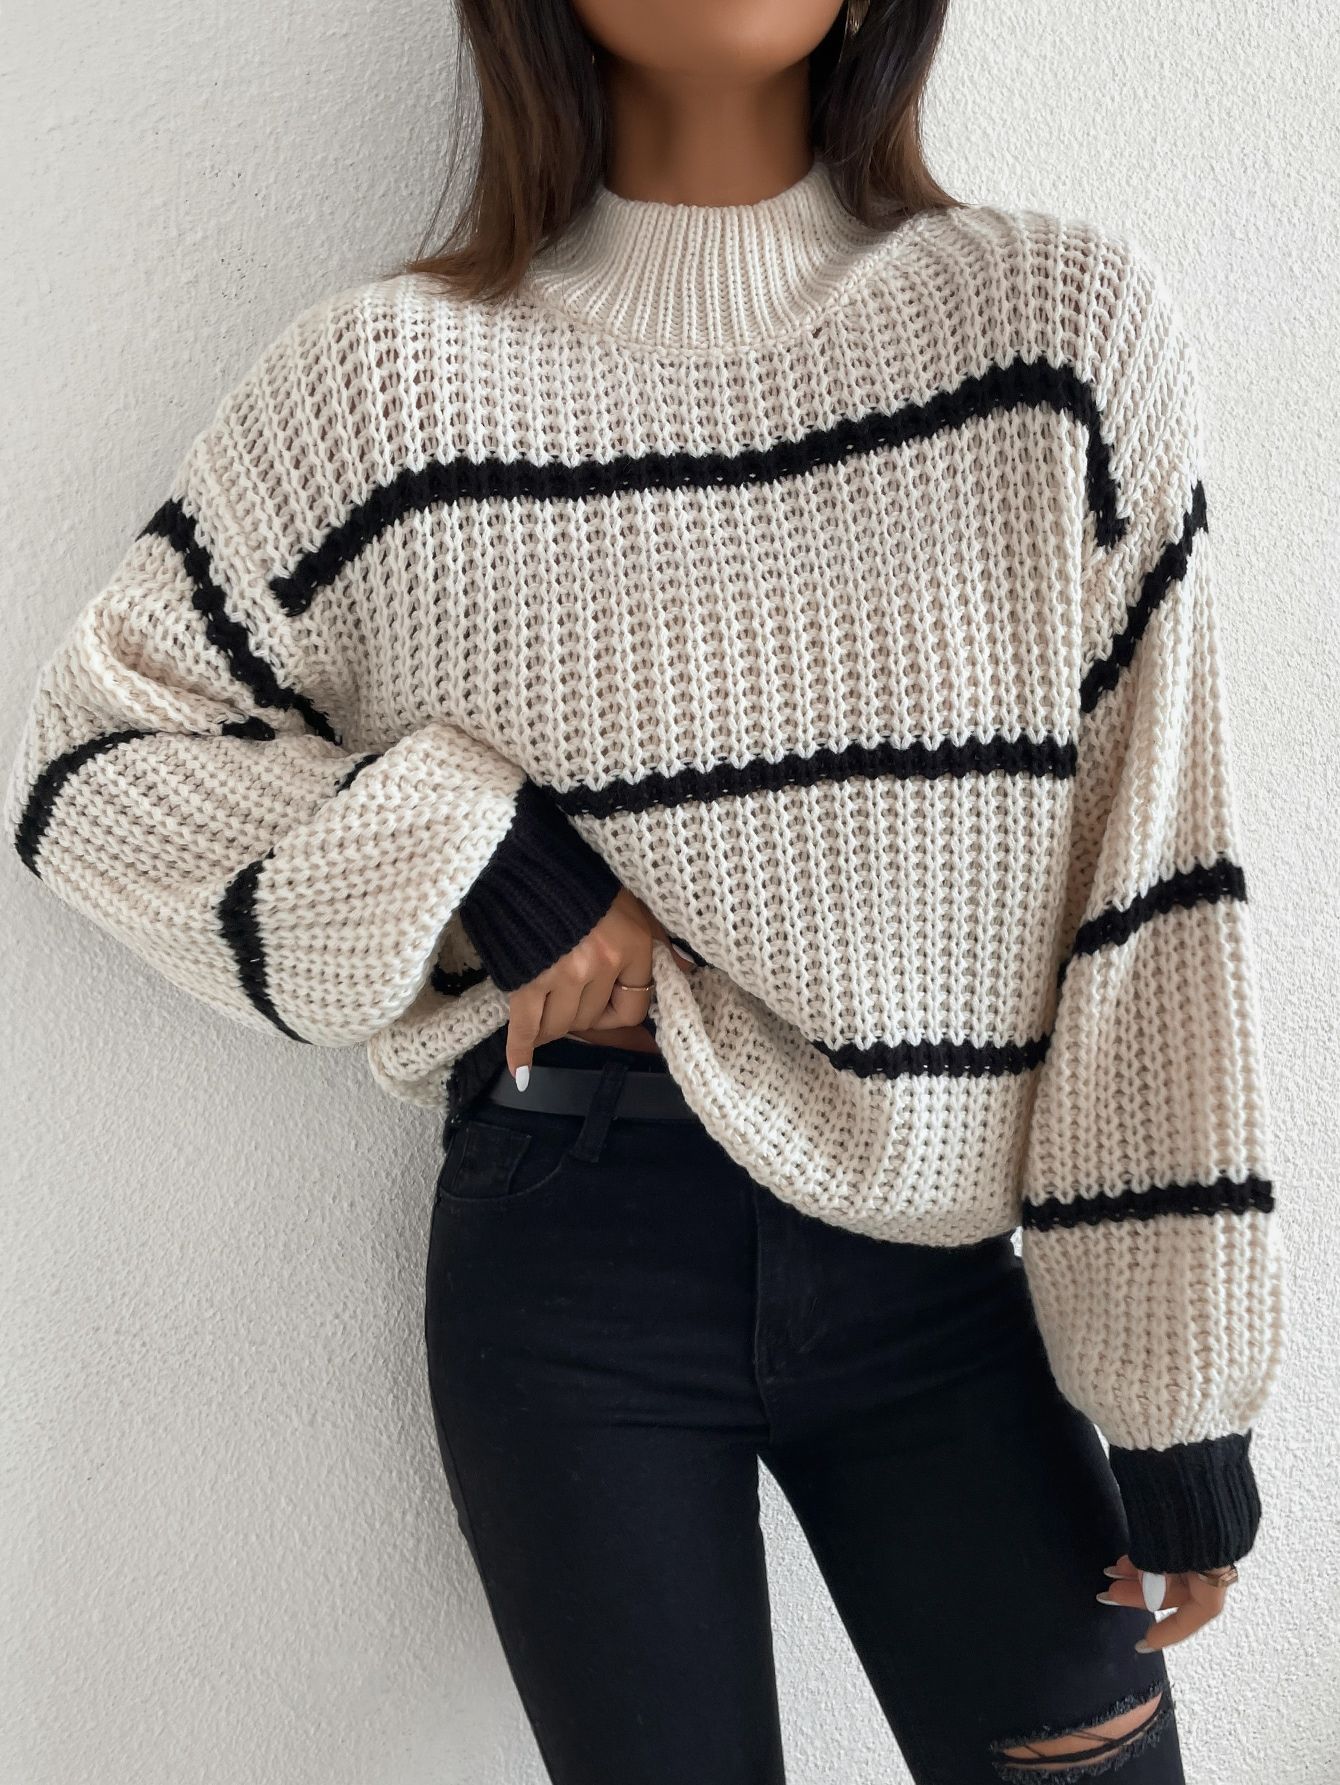 Cozy Essentials: Sweaters for Women That Keep You Warm in Style